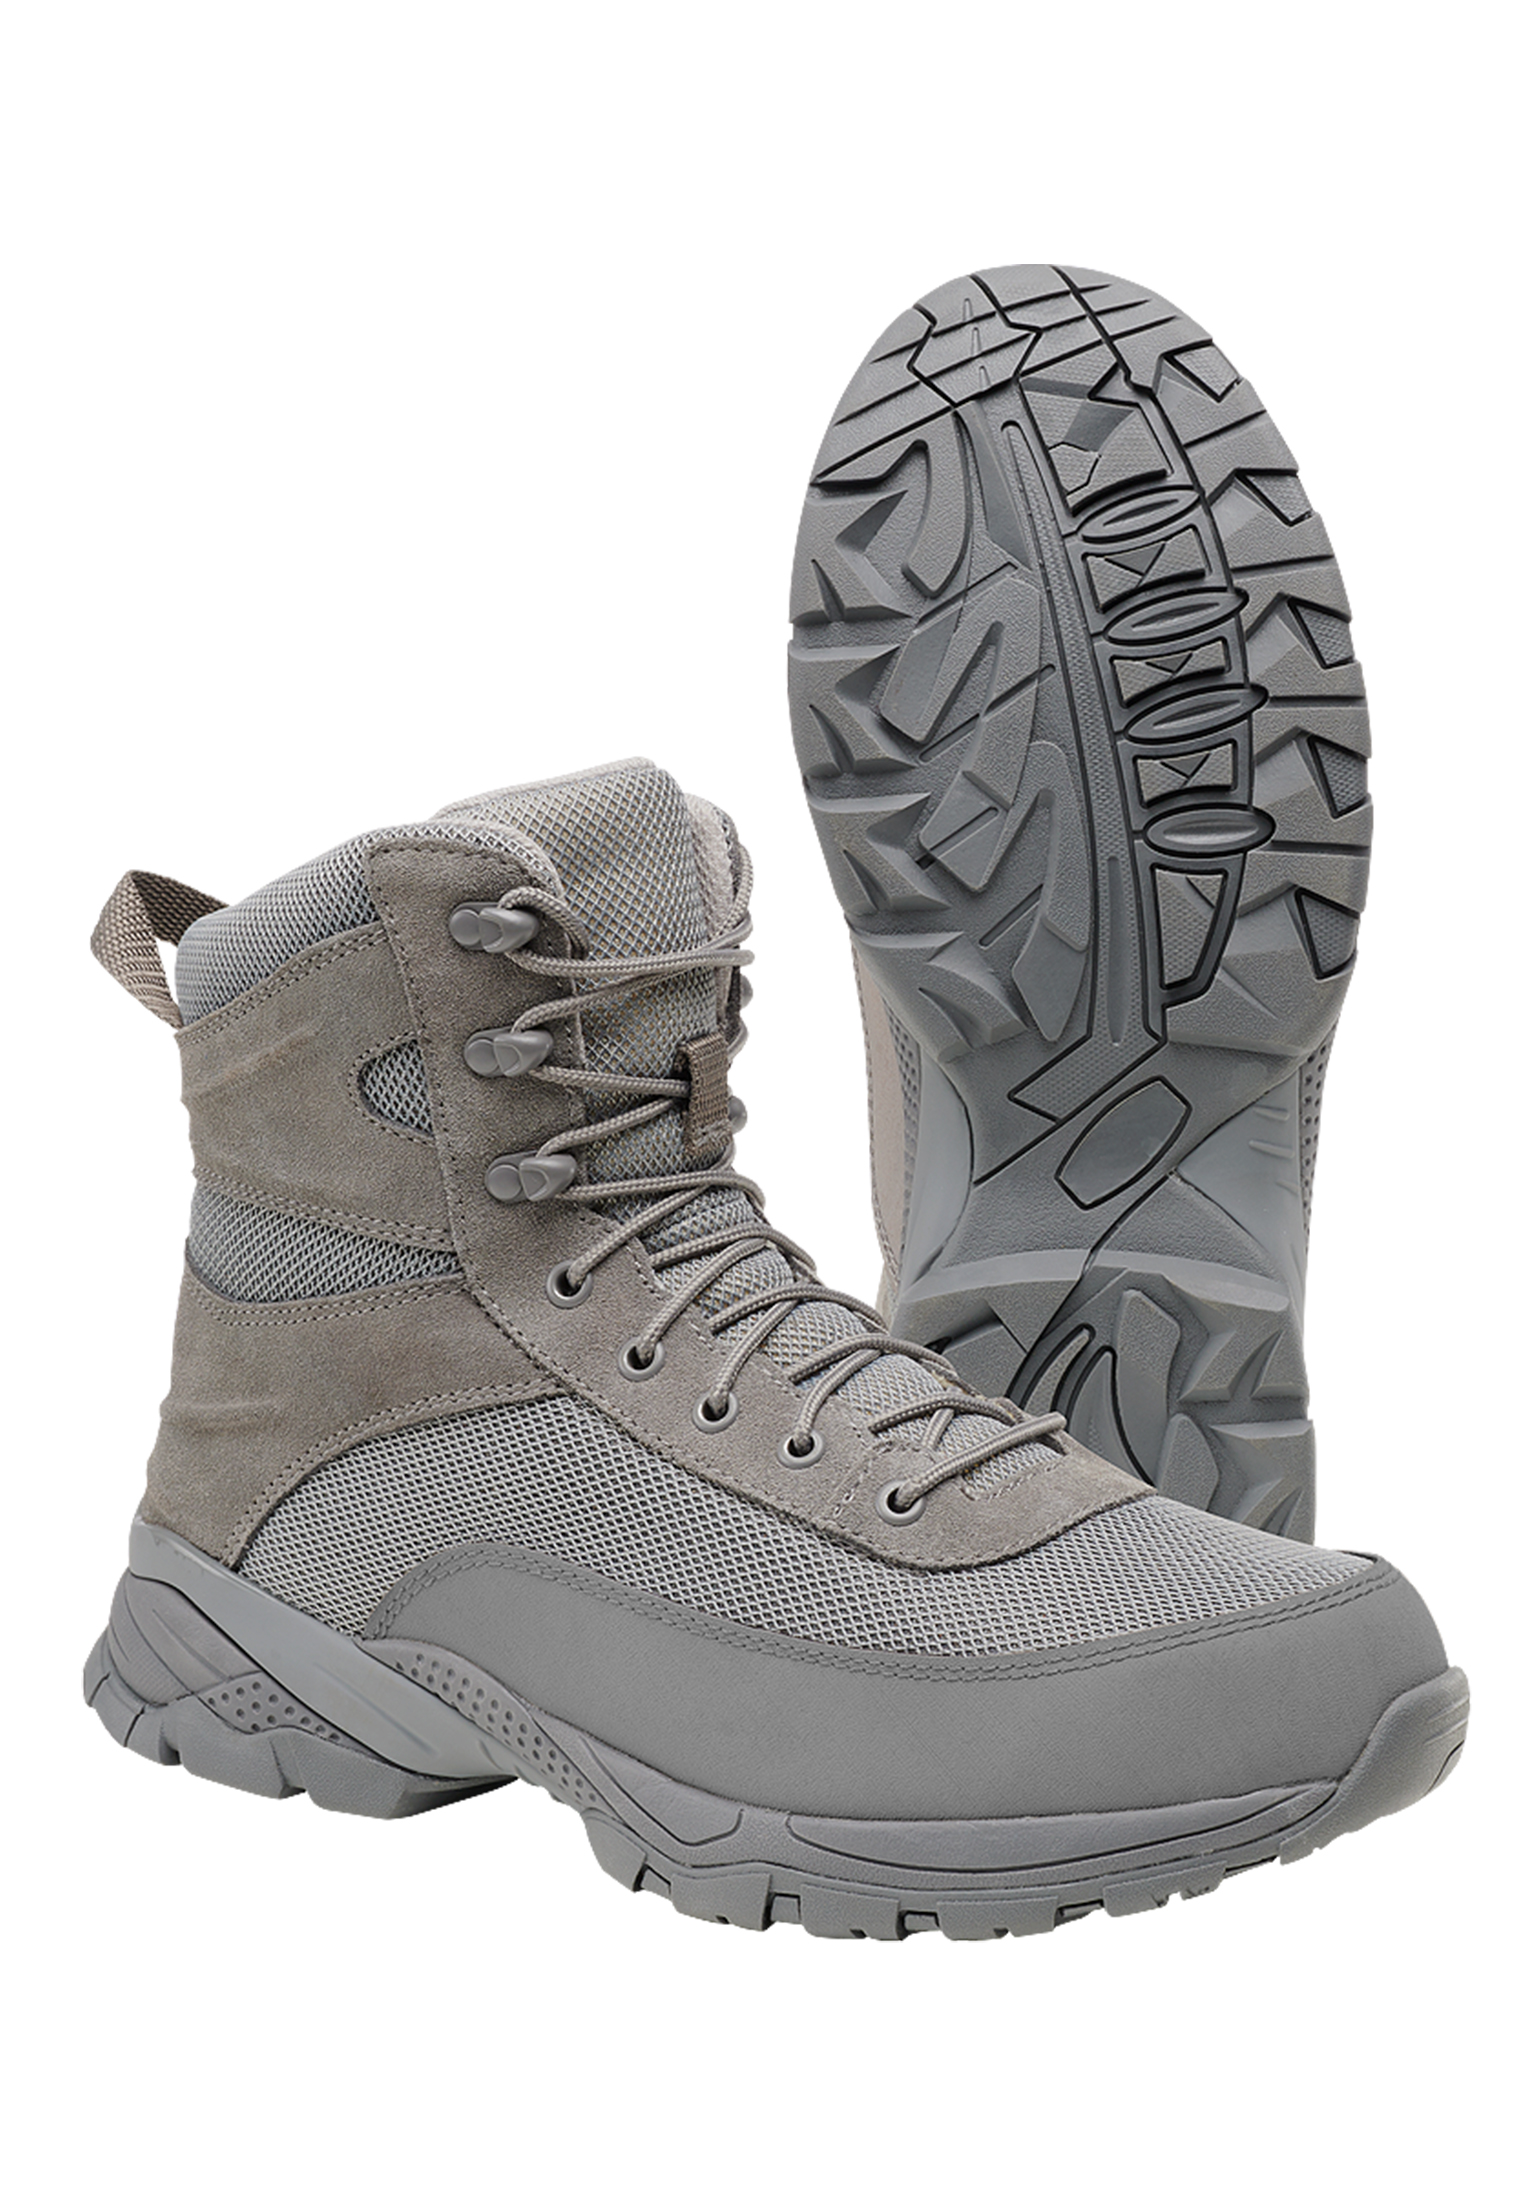 Schuhe Tactical Boot Next Generation in Farbe anthracite